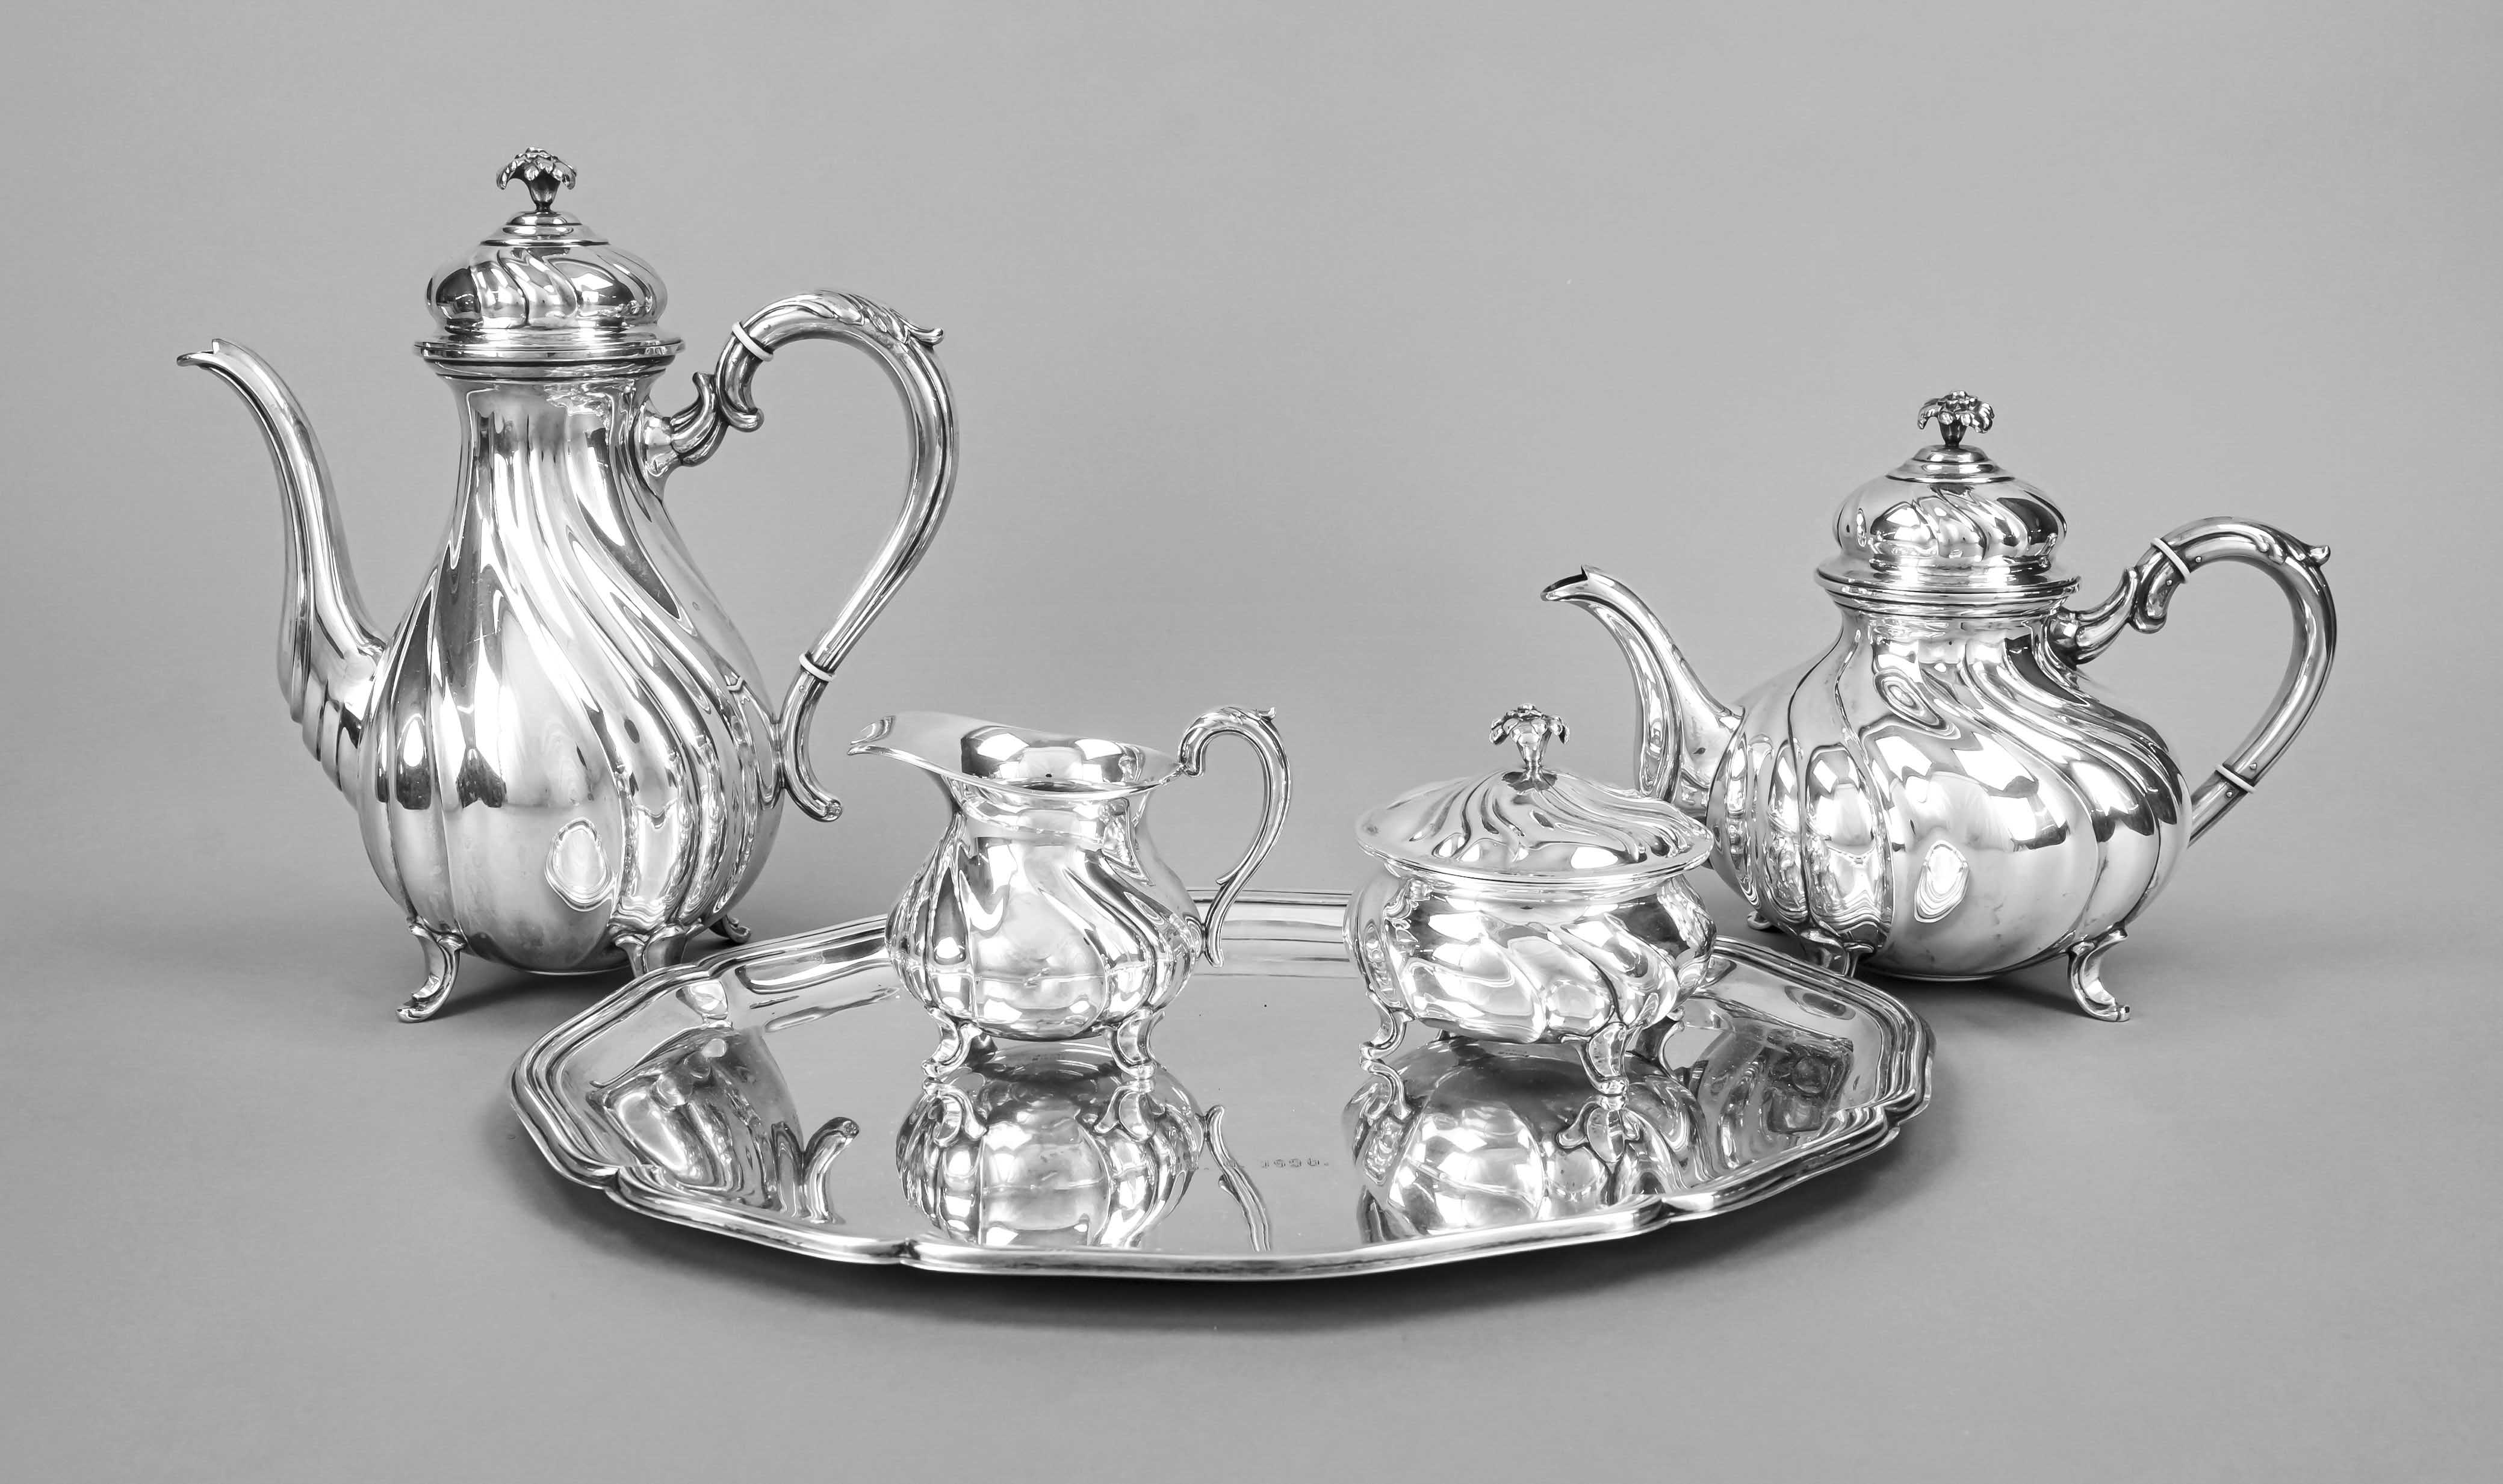 A four-piece coffee and tea centerpiece on tray, German, 20th century, maker's mark M. H.